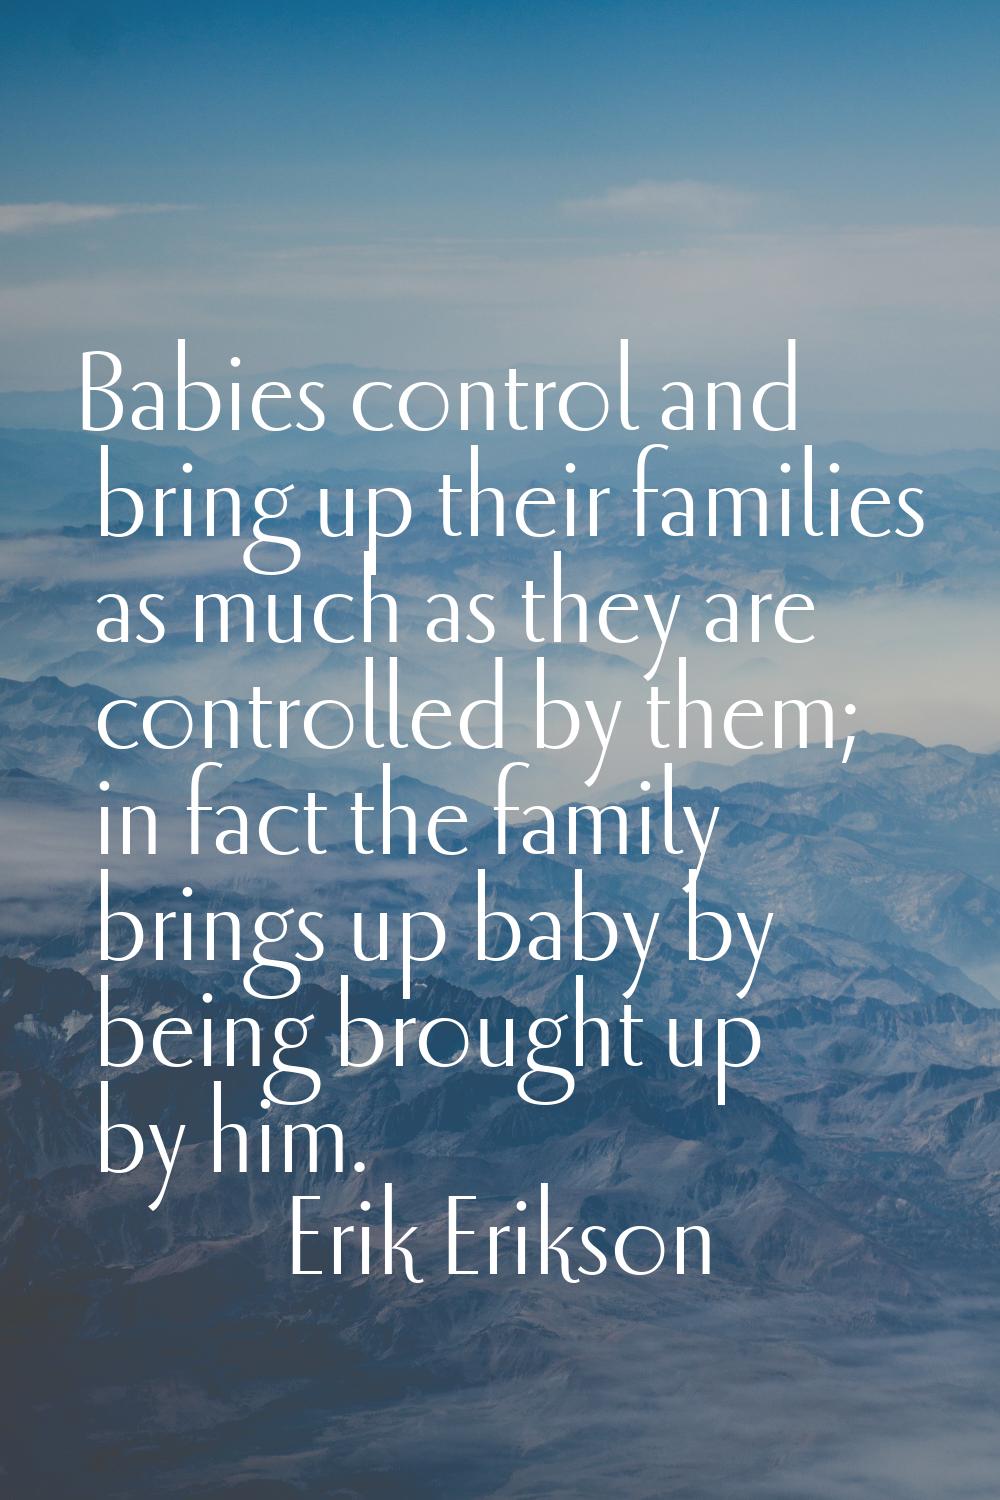 Babies control and bring up their families as much as they are controlled by them; in fact the fami